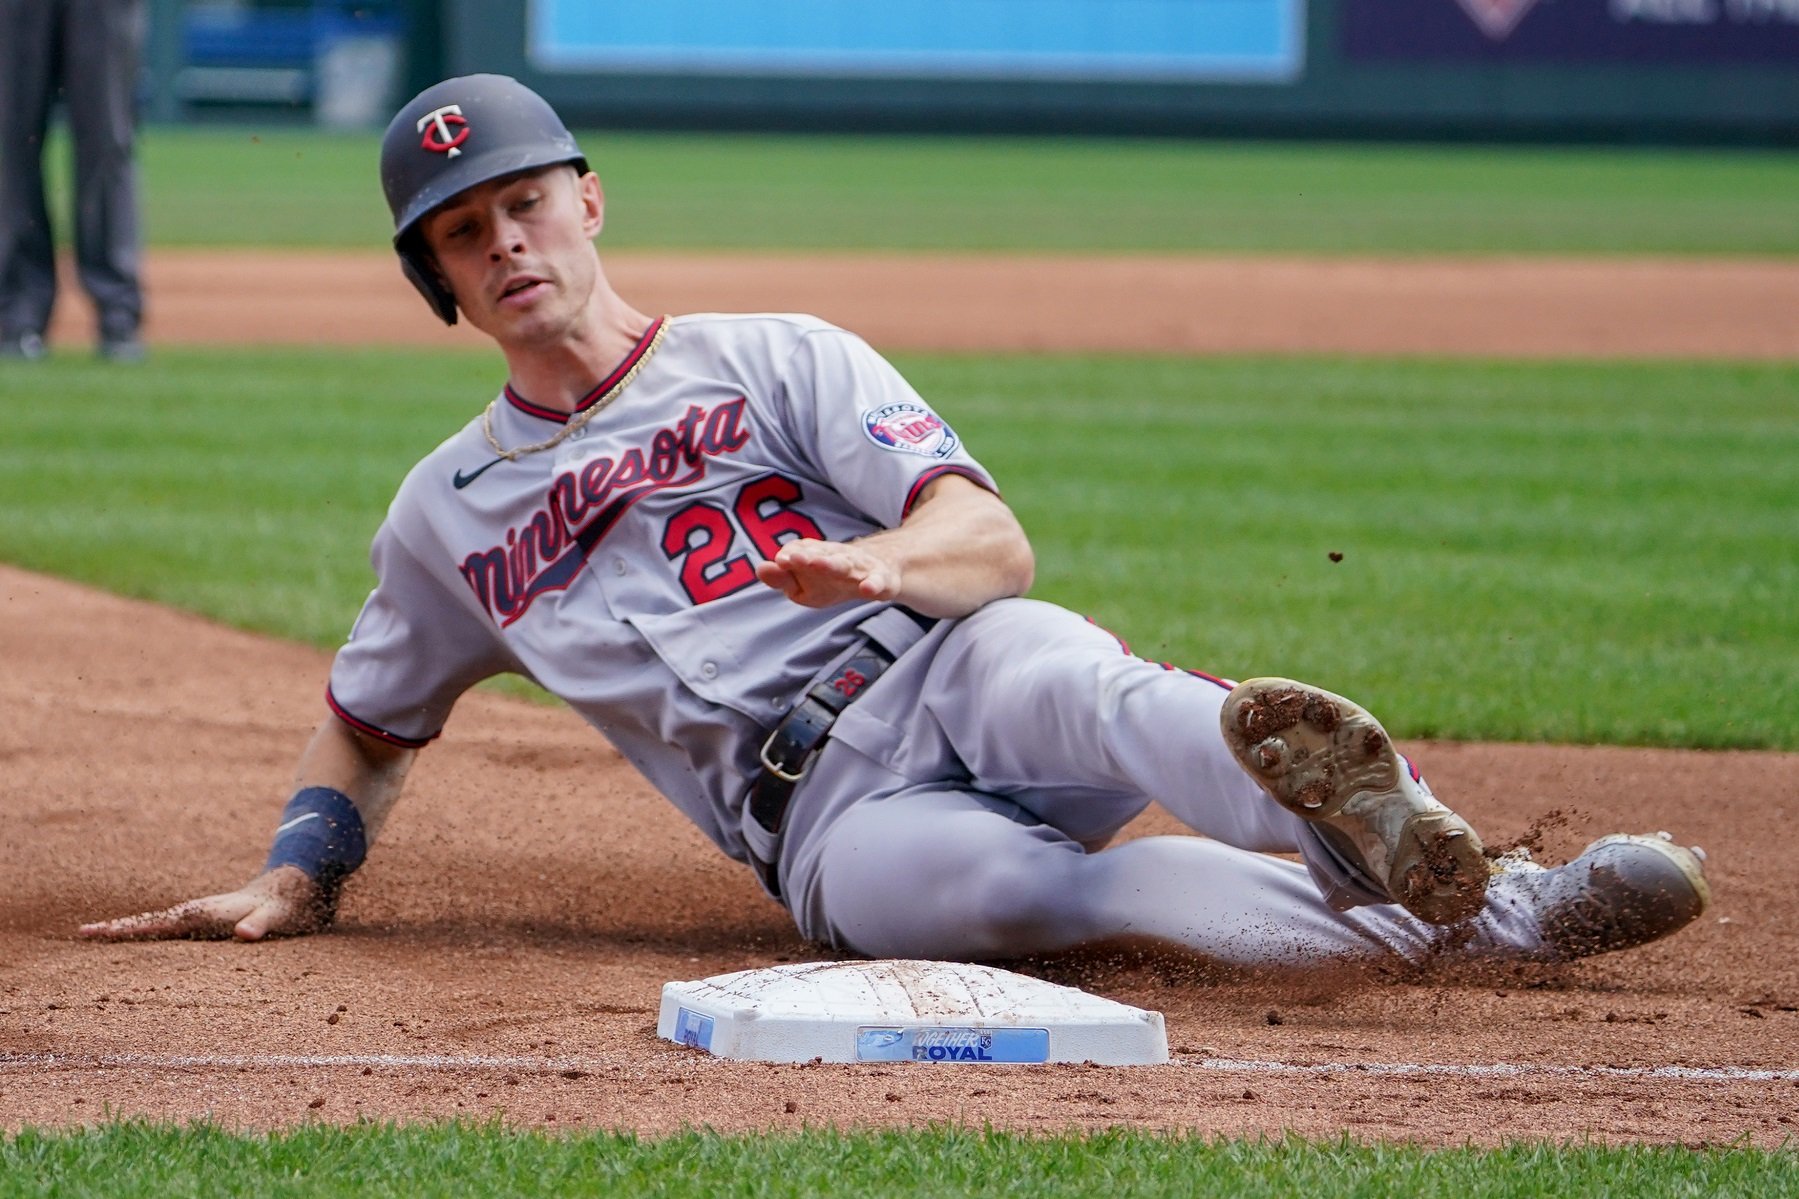 Max Kepler is the 'fertilizer to grow baseball in Europe' – DW – 09/06/2019